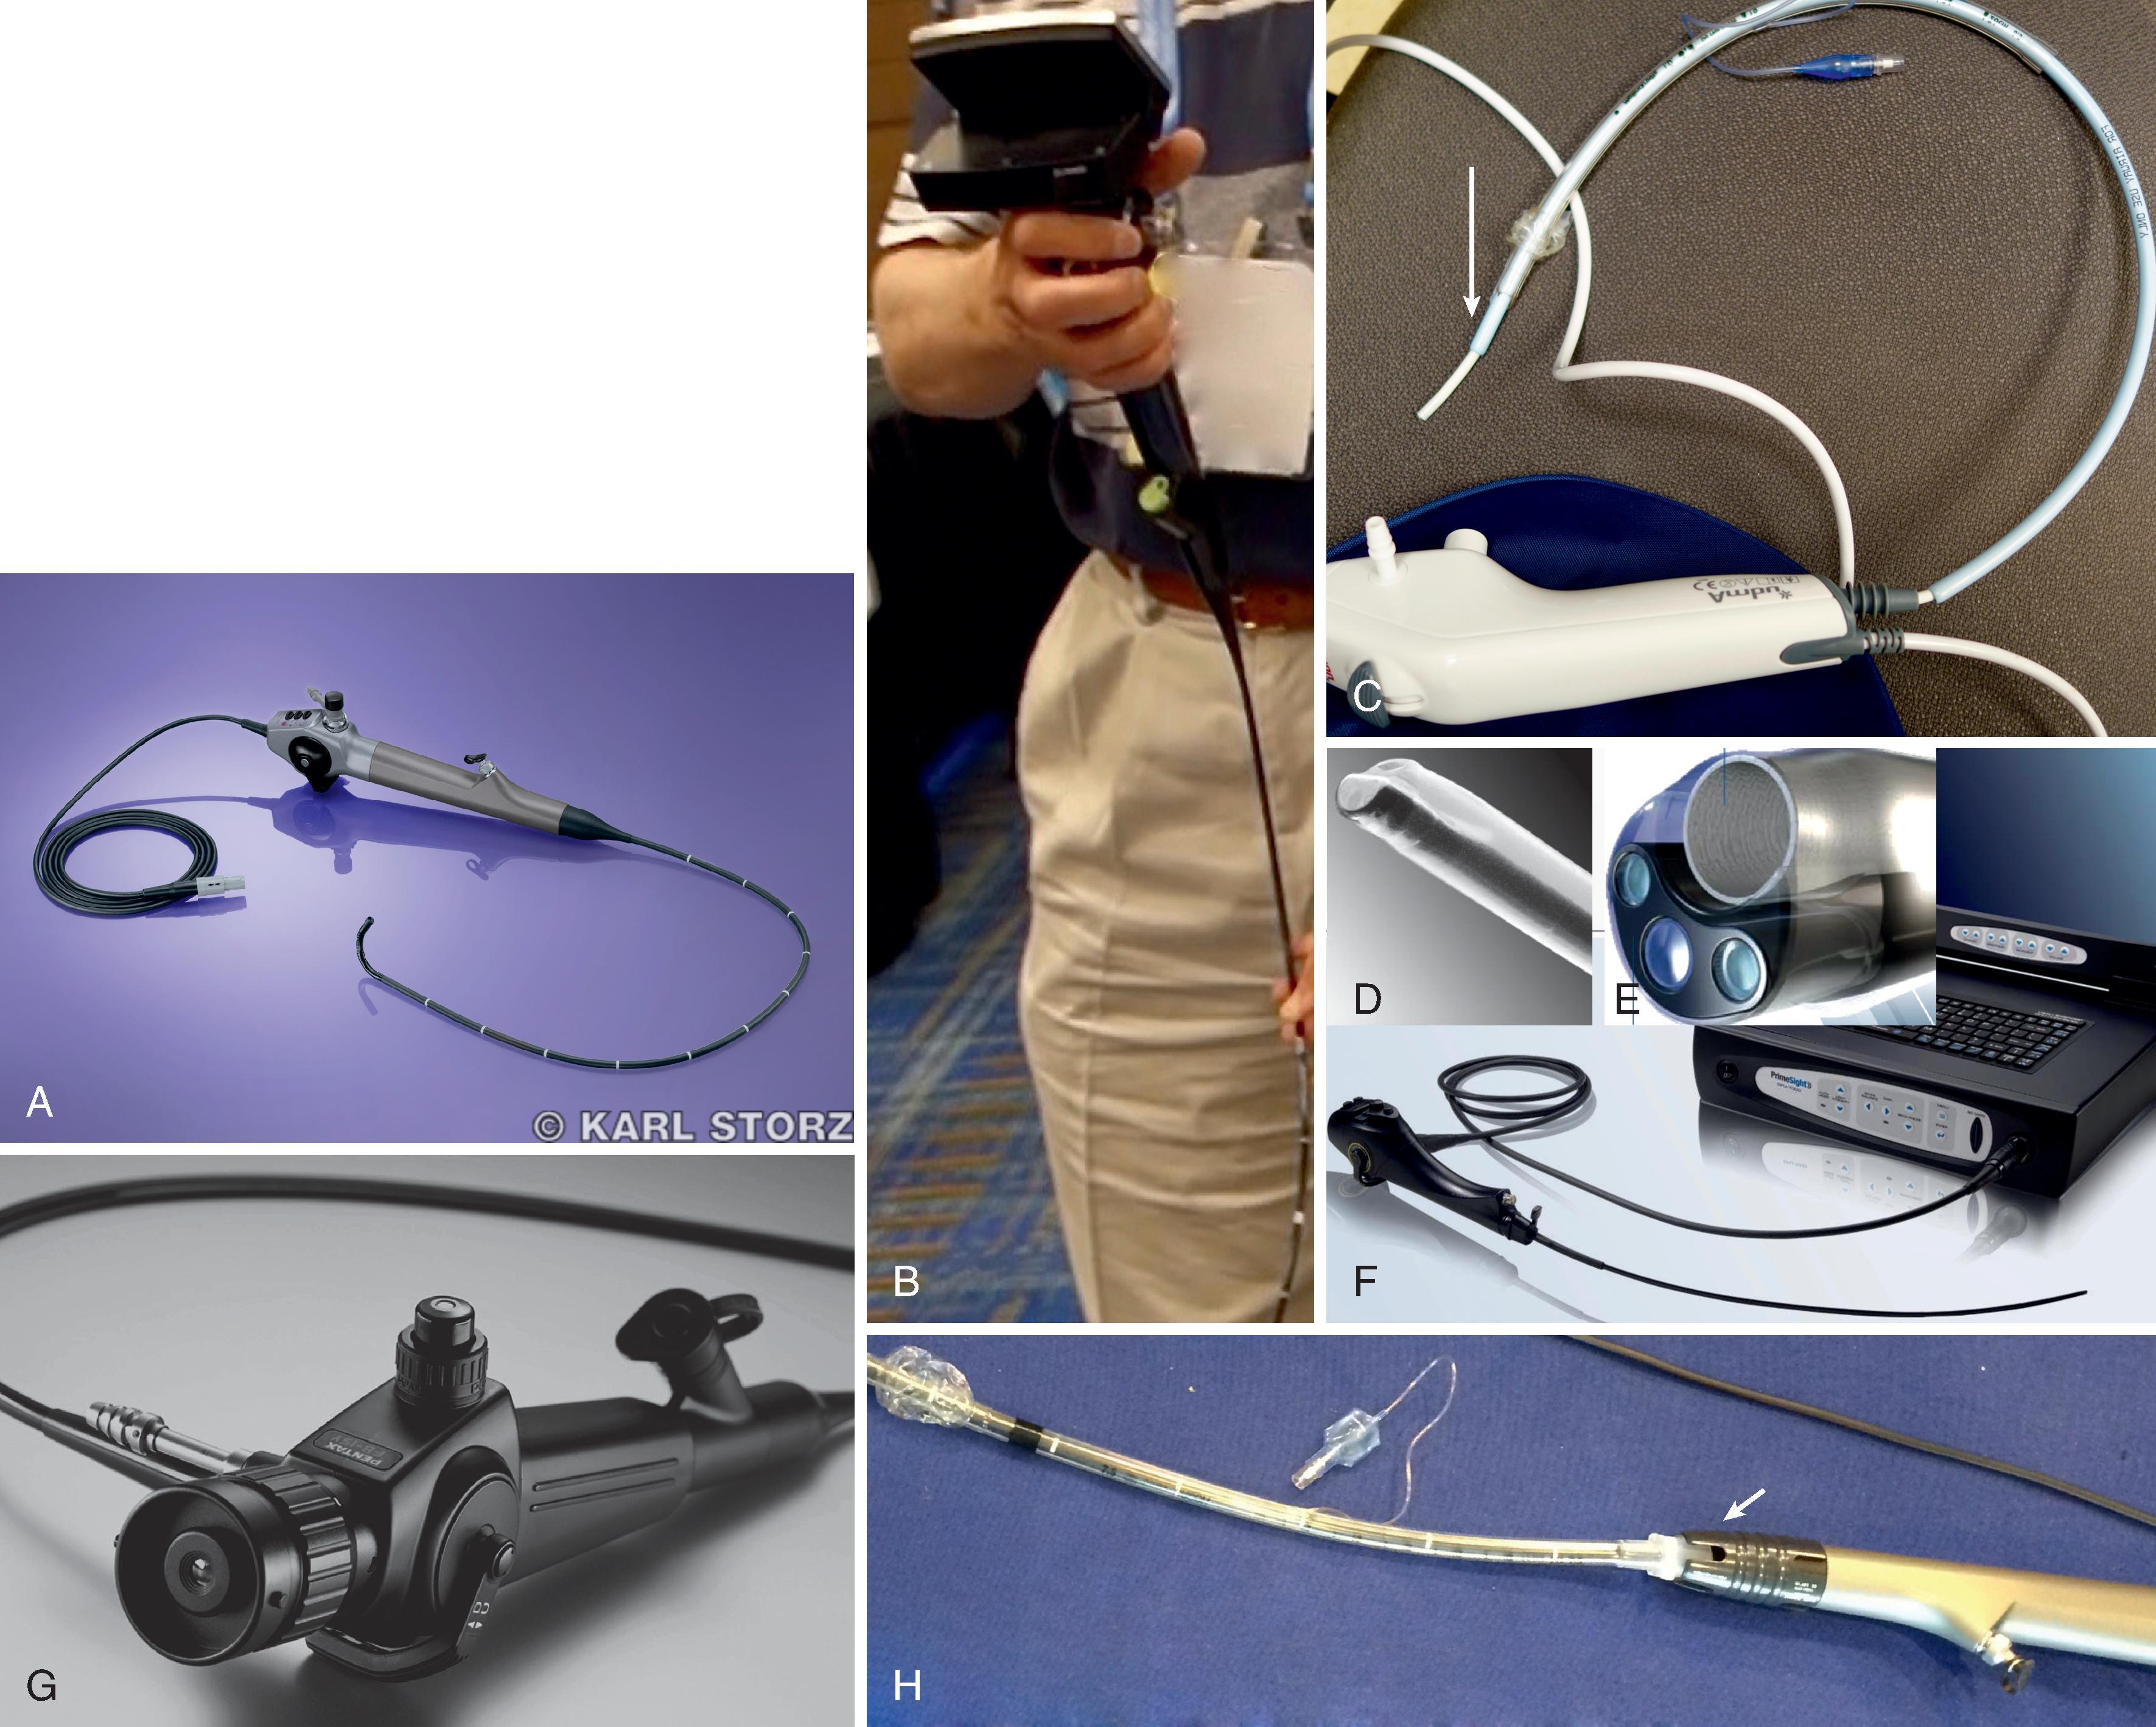 Fig. 24.1, (A) Heat-treated flexible intubation scope (FIS) for smoother endotracheal tube passage (Karl Storz GmbH & Co. KG, Tuttlingen, Germany); (B) Olympus MAF—completely portable, autoclavable FIS (Olympus America, Center Valley, PA); (C) Ambu disposable FIS (Ambu A/S, Ballerup, Denmark) with an Aintree catheter (Cook Medical Inc., Bloomington, IN), to reduce diameter difference between an endotracheal tube and the FIS; (D) Cogentix disposable sheath cover; (E) FIS tip of its insertion tube; (F) nondisposable FIS equipment (Cogentix Medical, Minnetonka, MN); (G) Pentax FIS (Pentax Medical, Montvale, NJ); (H) FIS with an endotracheal tube holder.